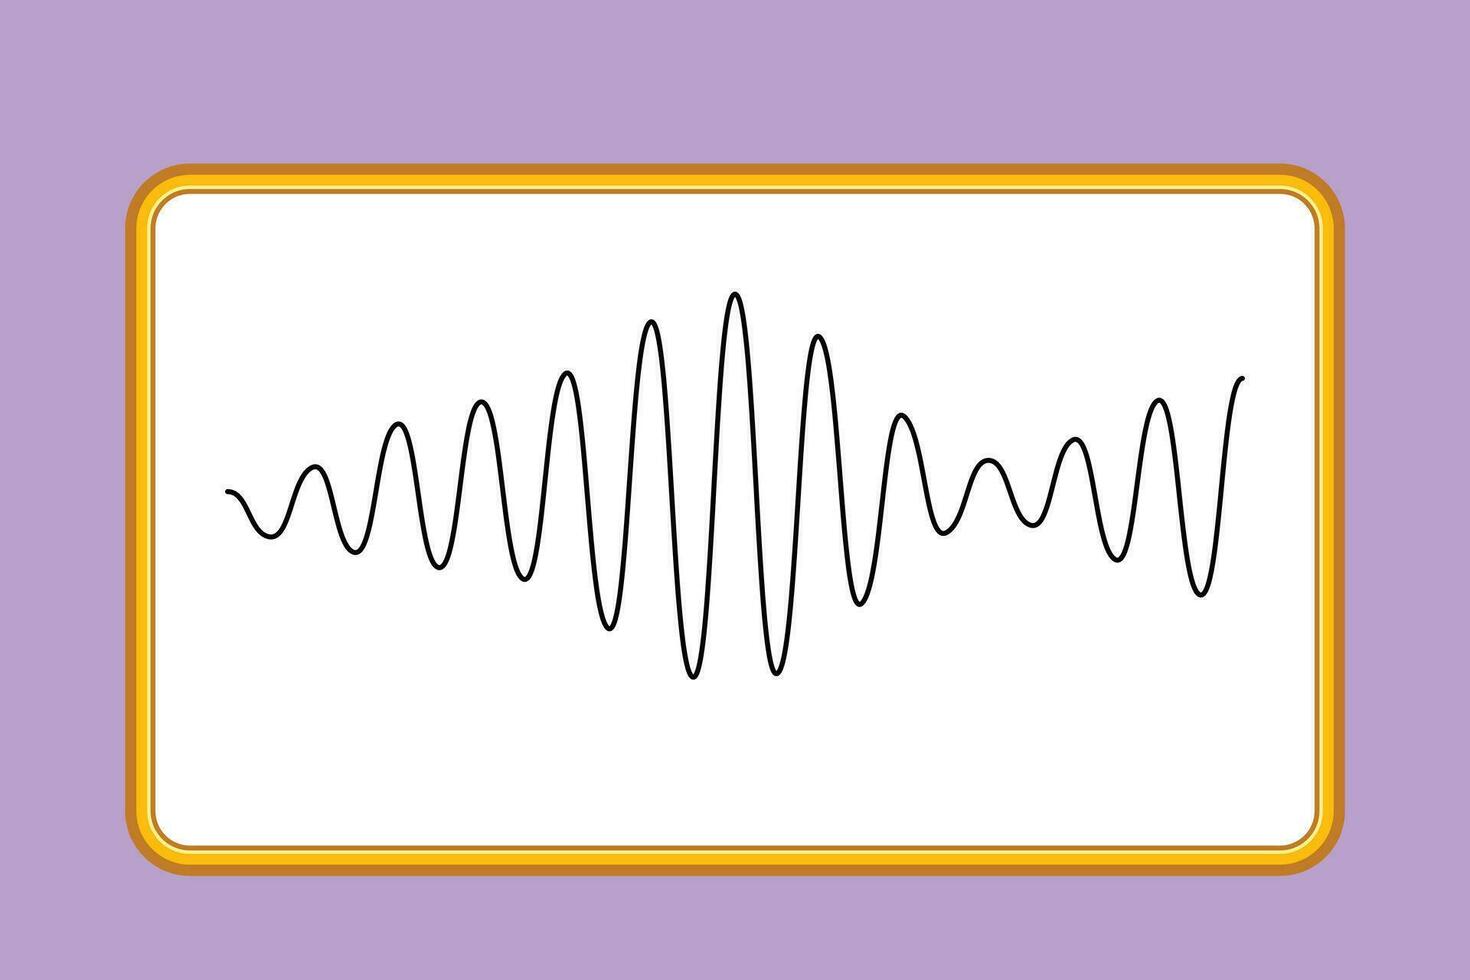 Graphic flat design drawing of black sound waves. Music audio frequency, voice line waveform, electronic radio signal, volume level symbol. Vector curve radio waves. Cartoon style vector illustration